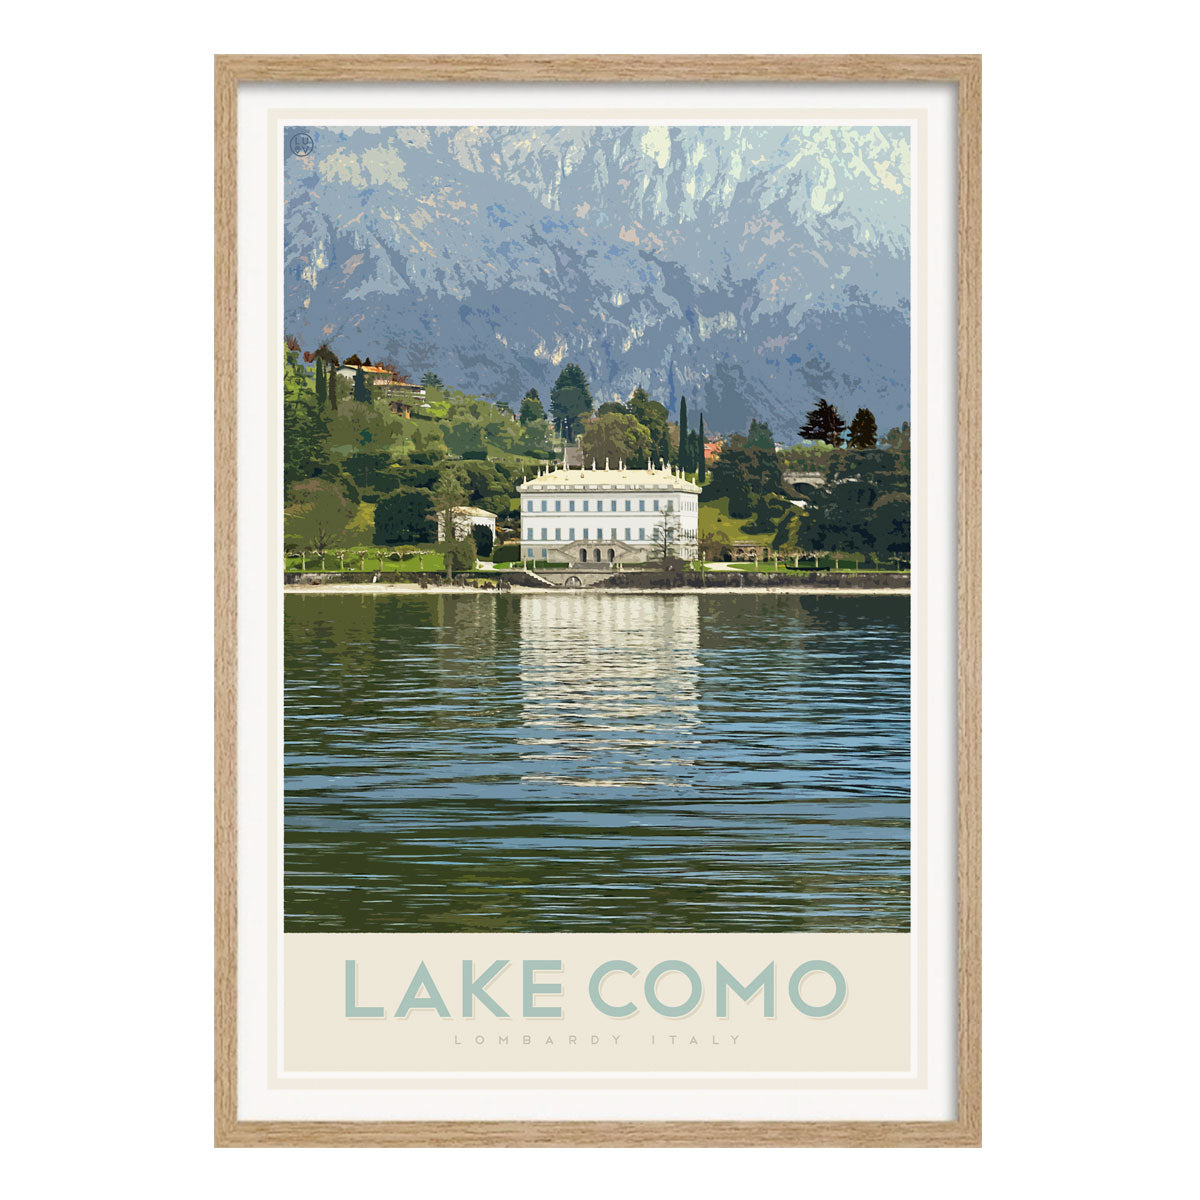 Lake Como Italy, vintage travel style framed print by places we luv